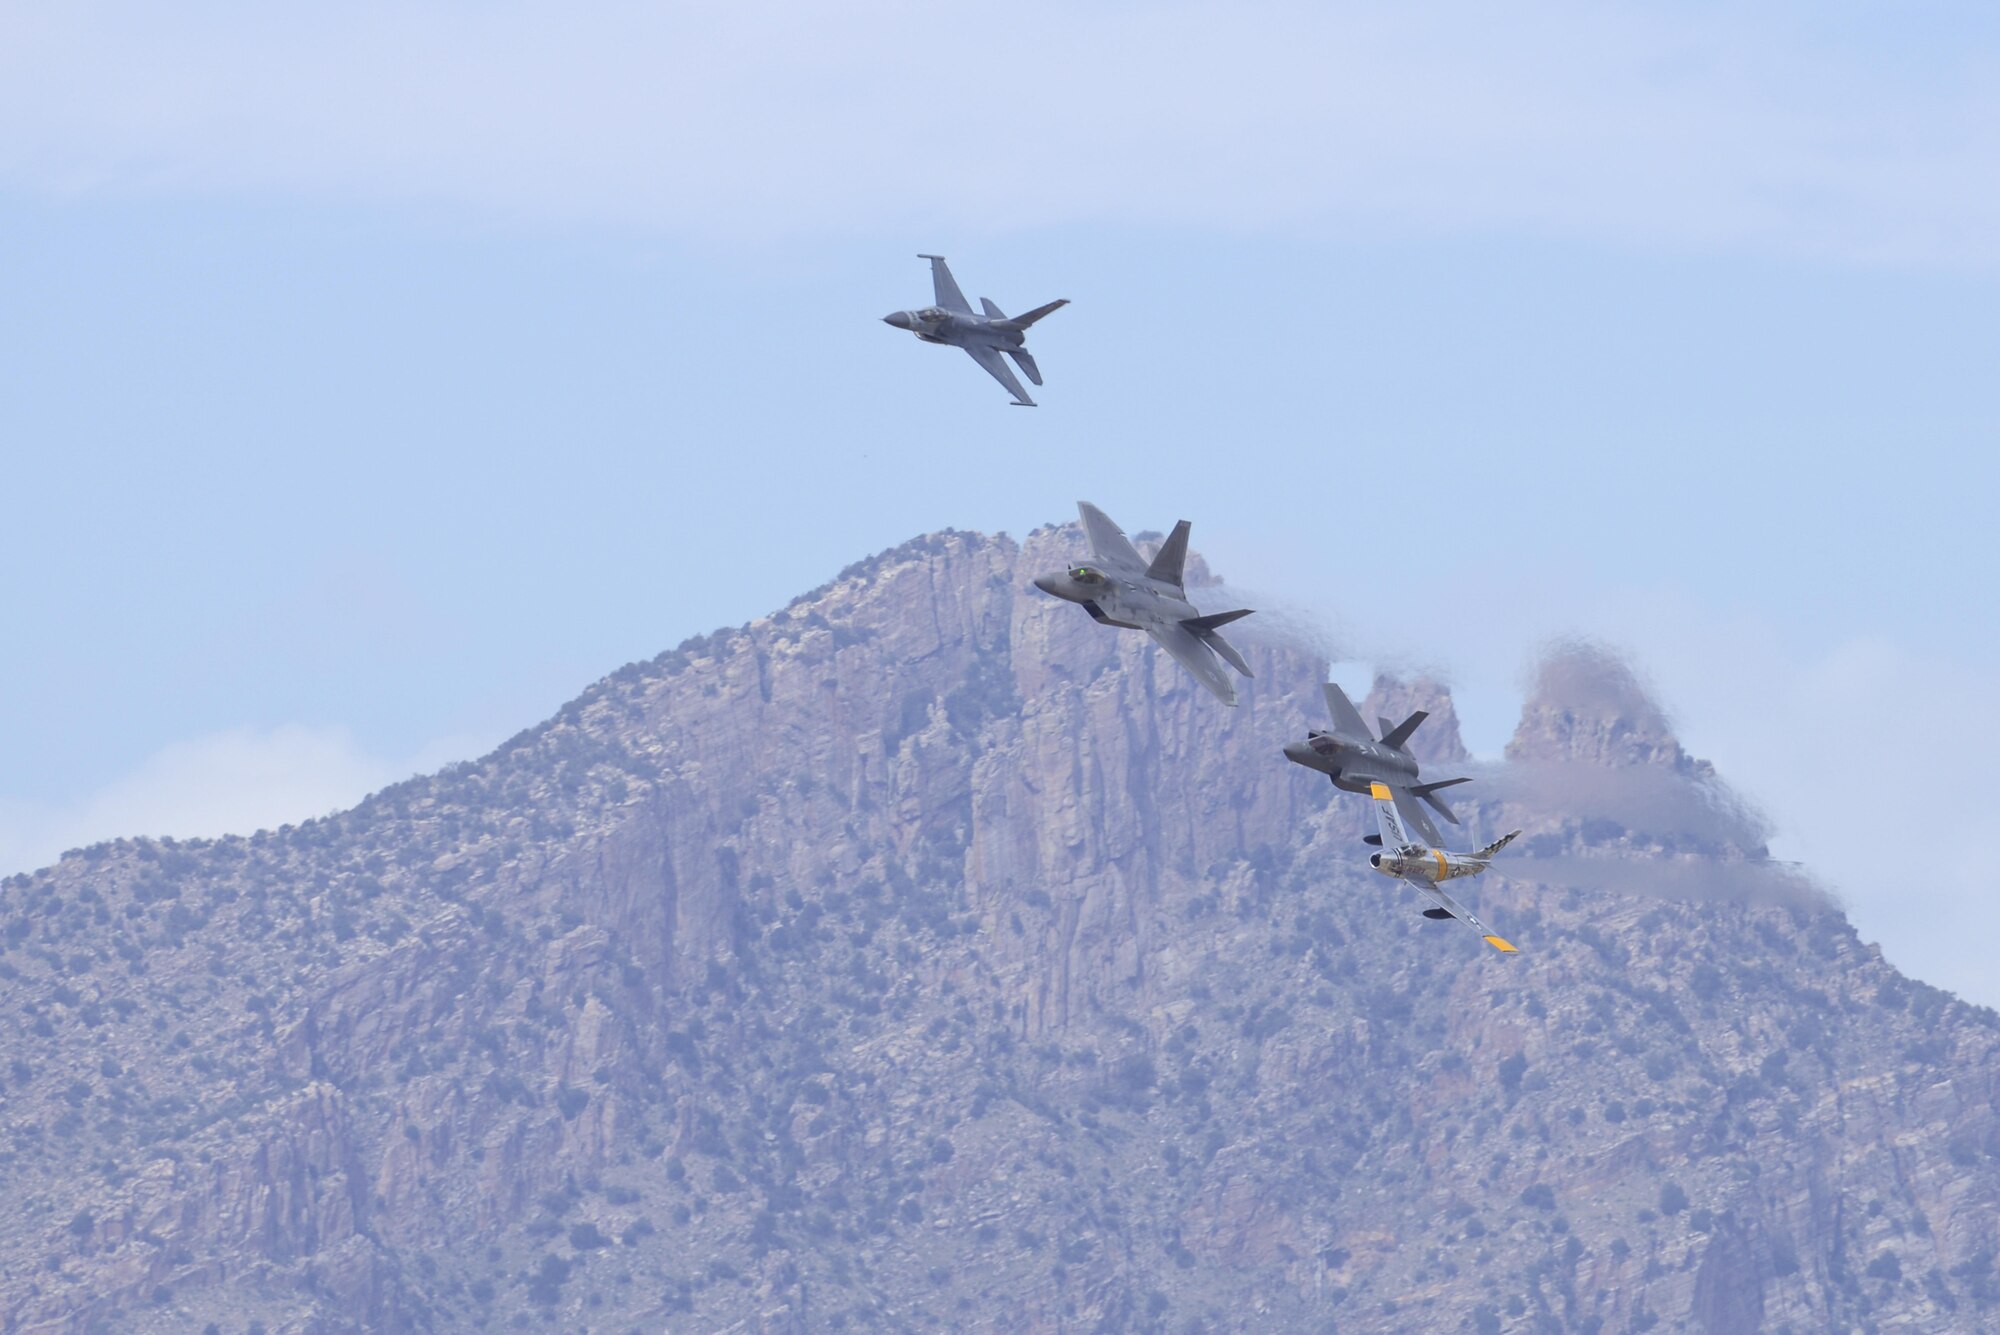 An F-16 Fighting Falcon, F-22 Raptor, F-35 Lightning II and an F-86 Sabre fly in formation during the 2016 Heritage Flight Training and Certification Course at Davis-Monthan Air Force Base, Ariz., March 6, 2016. Established in 1997, the HFTCC certifies civilian pilots of historic military aircraft and U.S. Air Force pilots to fly in formation together during the upcoming air show season. (U.S. Air Force photo by Senior Airman Chris Massey/Released)